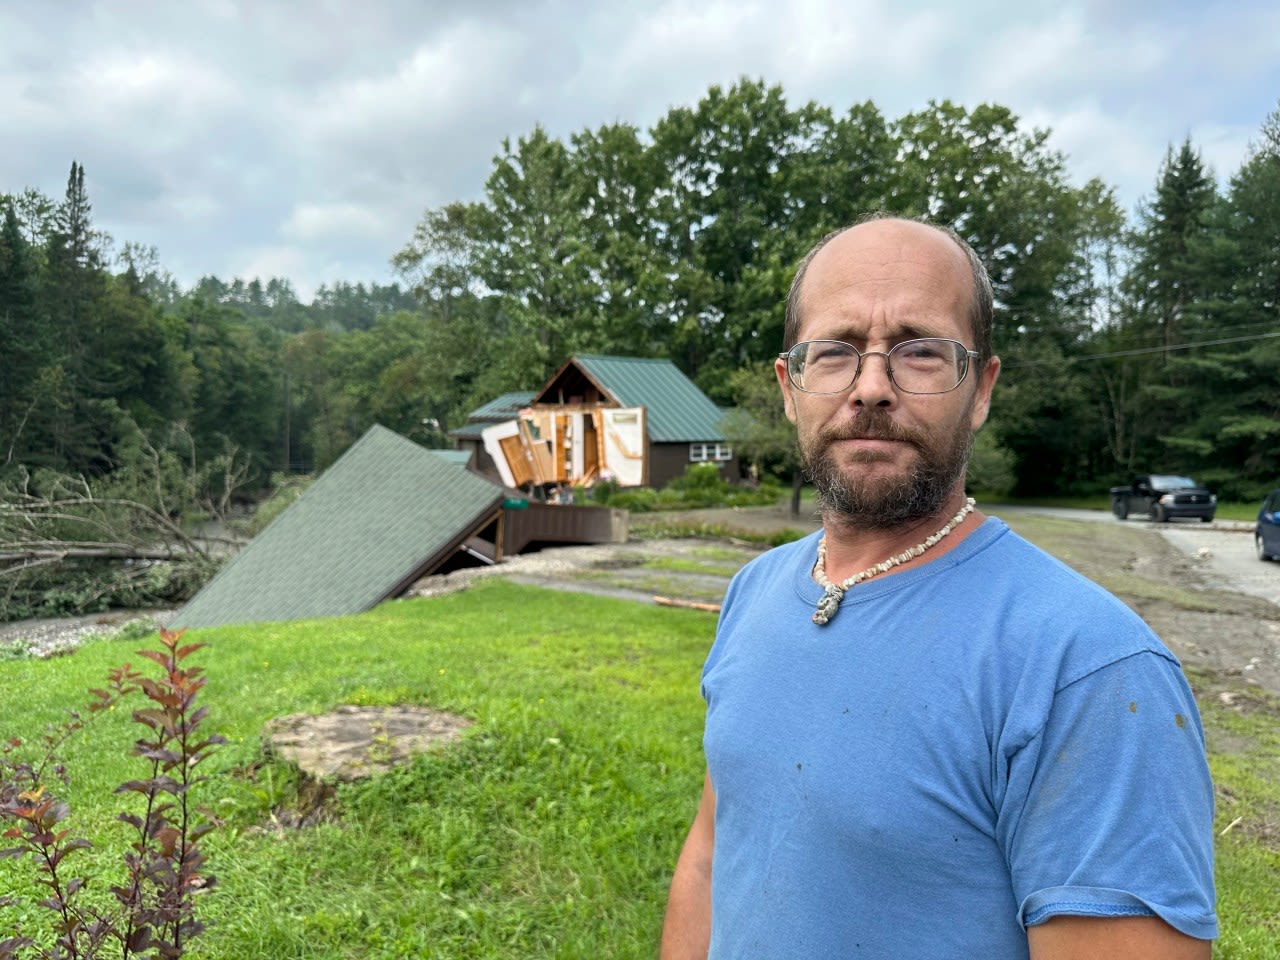 Vermont man evacuates neighbors during flooding, weeks after witnessing a driver get swept away